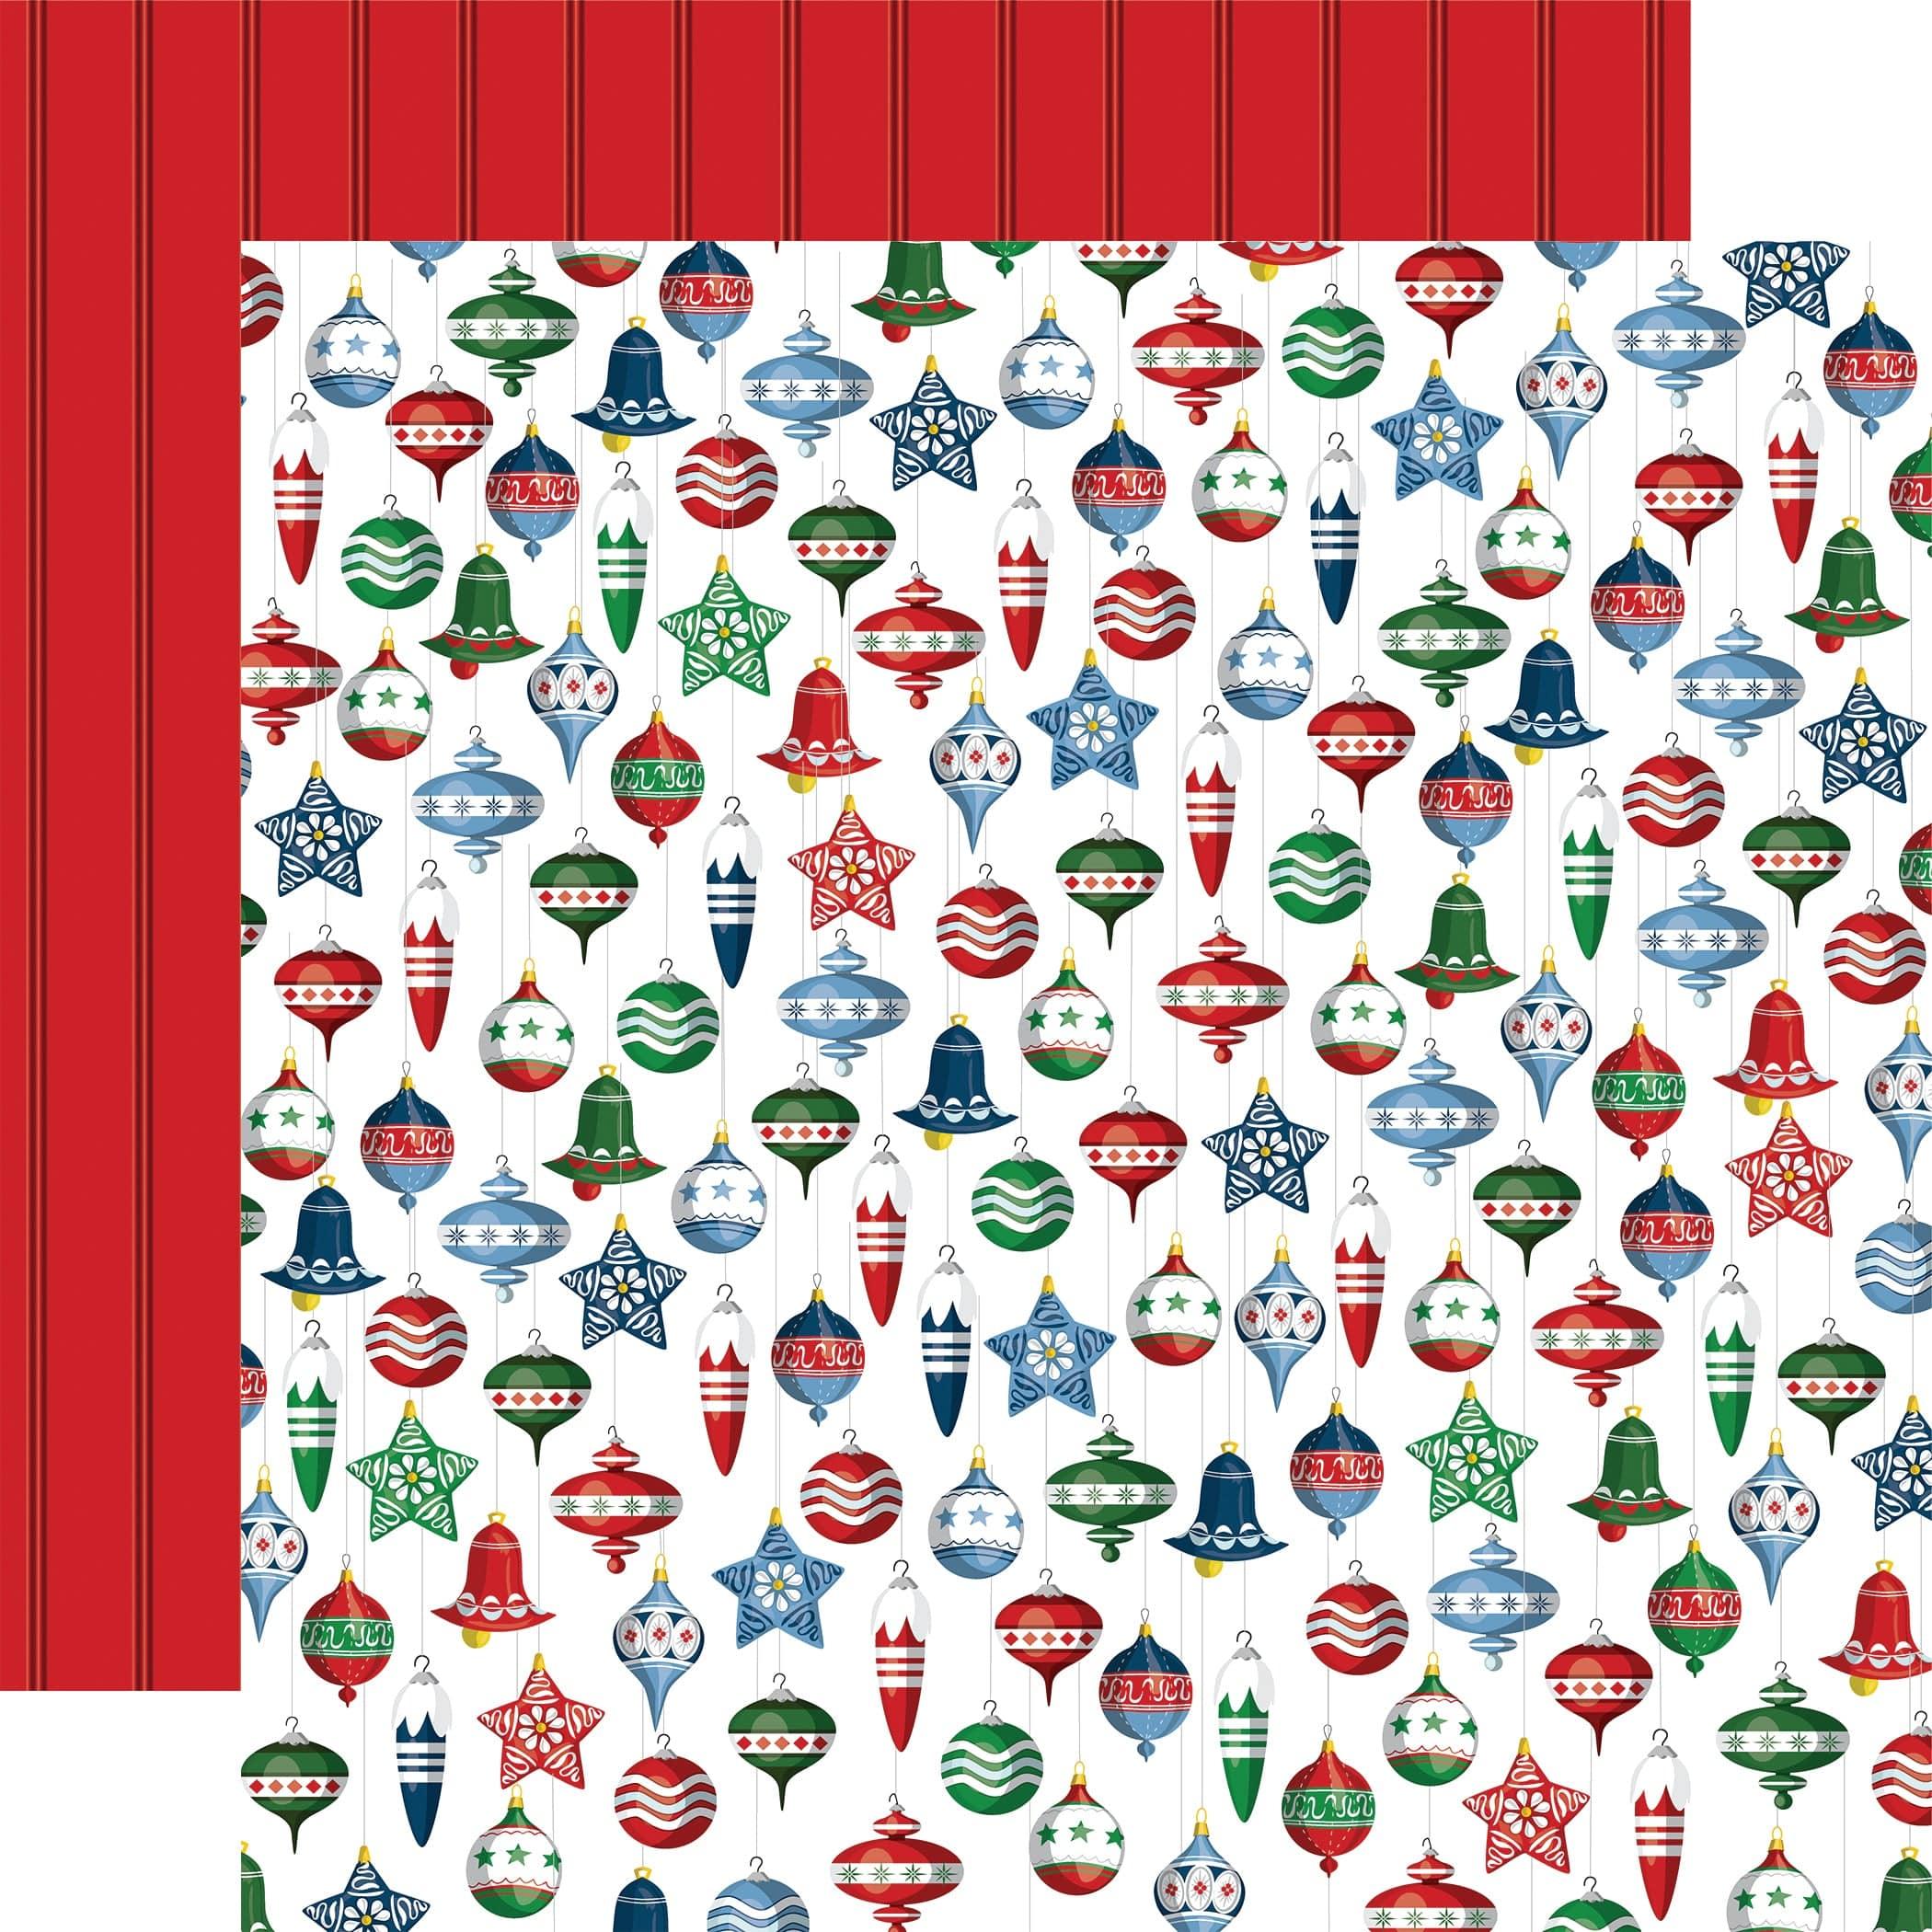 Digital Scrapbook Paper Christmas Holiday Digital Paper For Scrapbook  Invitation Cards Gift Wrapping 12x12 - Hmd00016